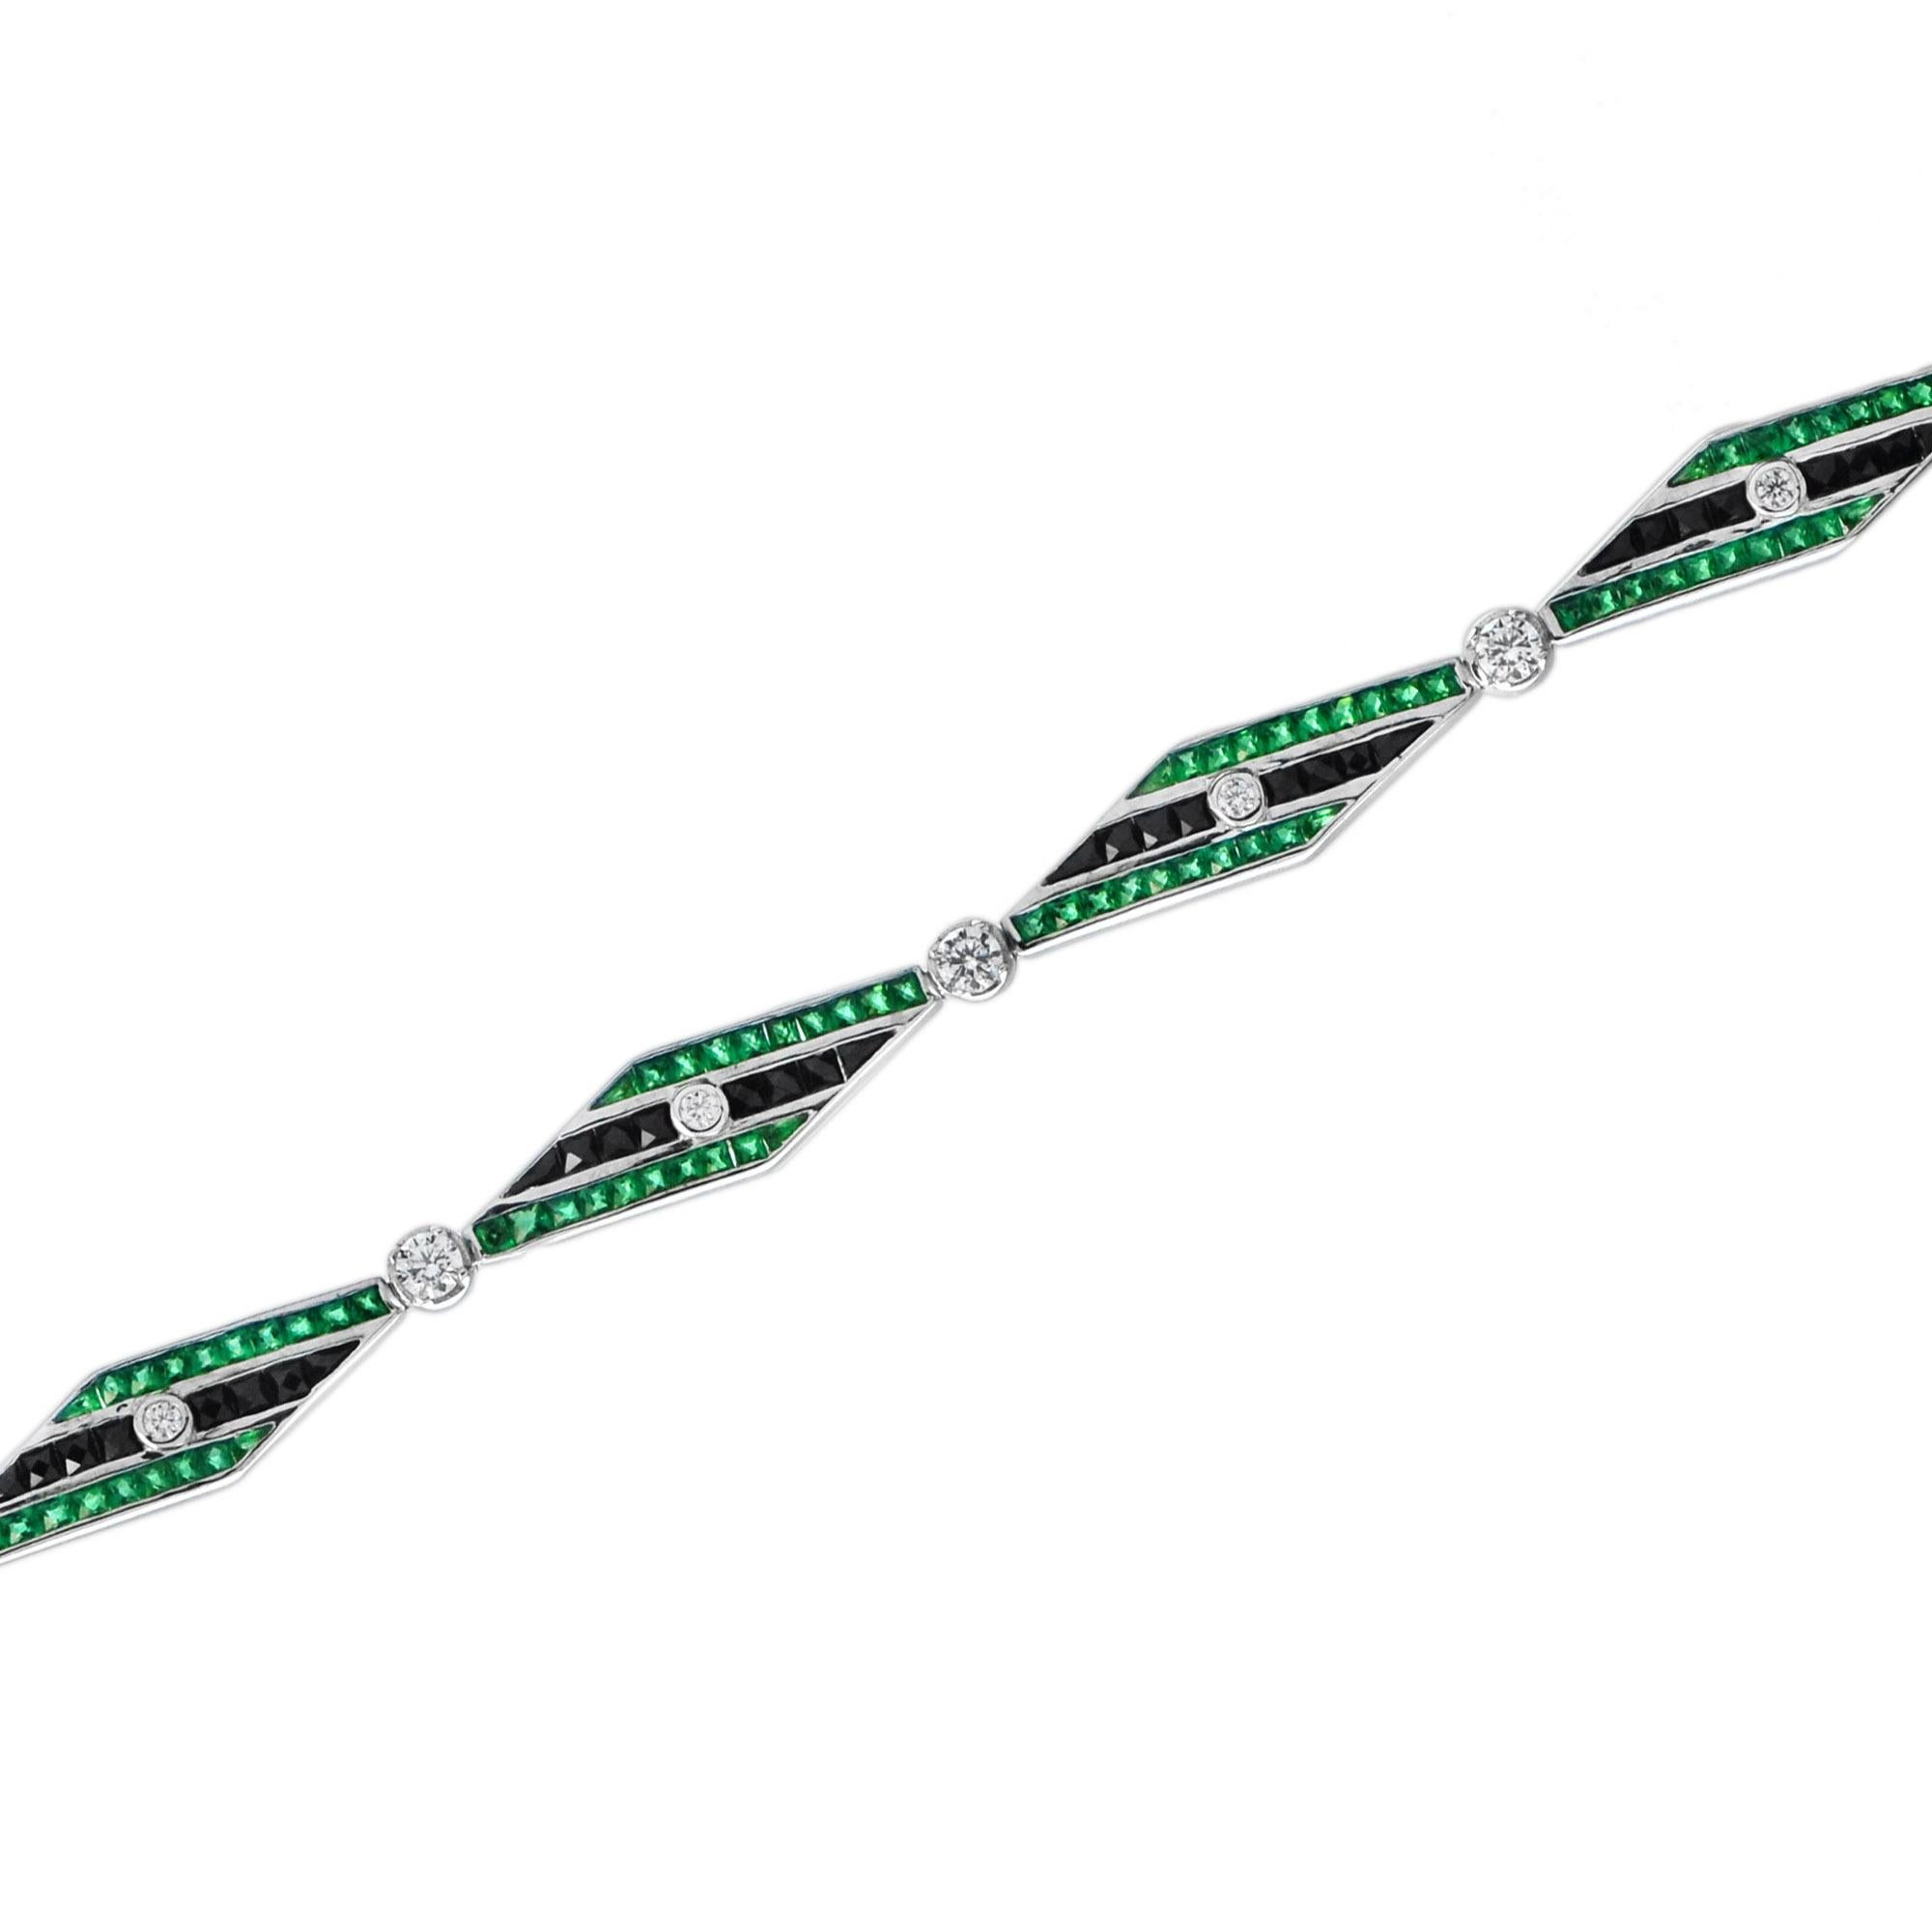 This Art Deo design bracelet is exceptional! It features 18k white gold links set with round diamonds, square-cut onyx, and emerald. This piece closes with a concealed clasp and safety catch.  Given the outstanding quality and beautiful design of